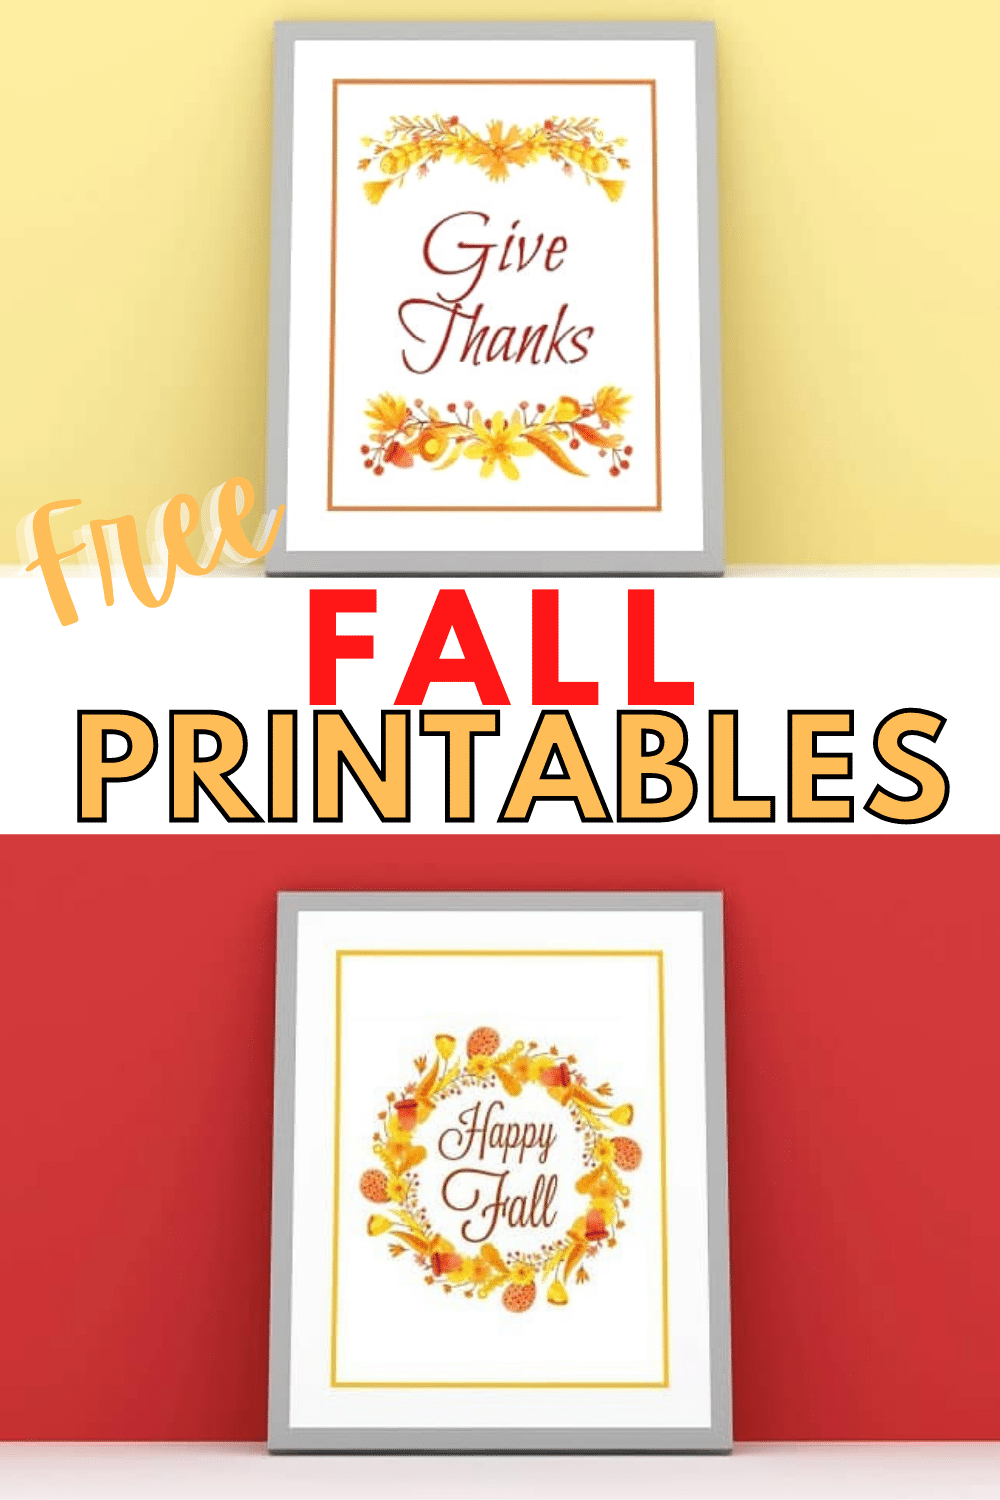 These Fall printables are a cute and easy way to decorate your house for fall. Just print and frame! #printables #fallprintables #freeprintables #fall via @wondermomwannab